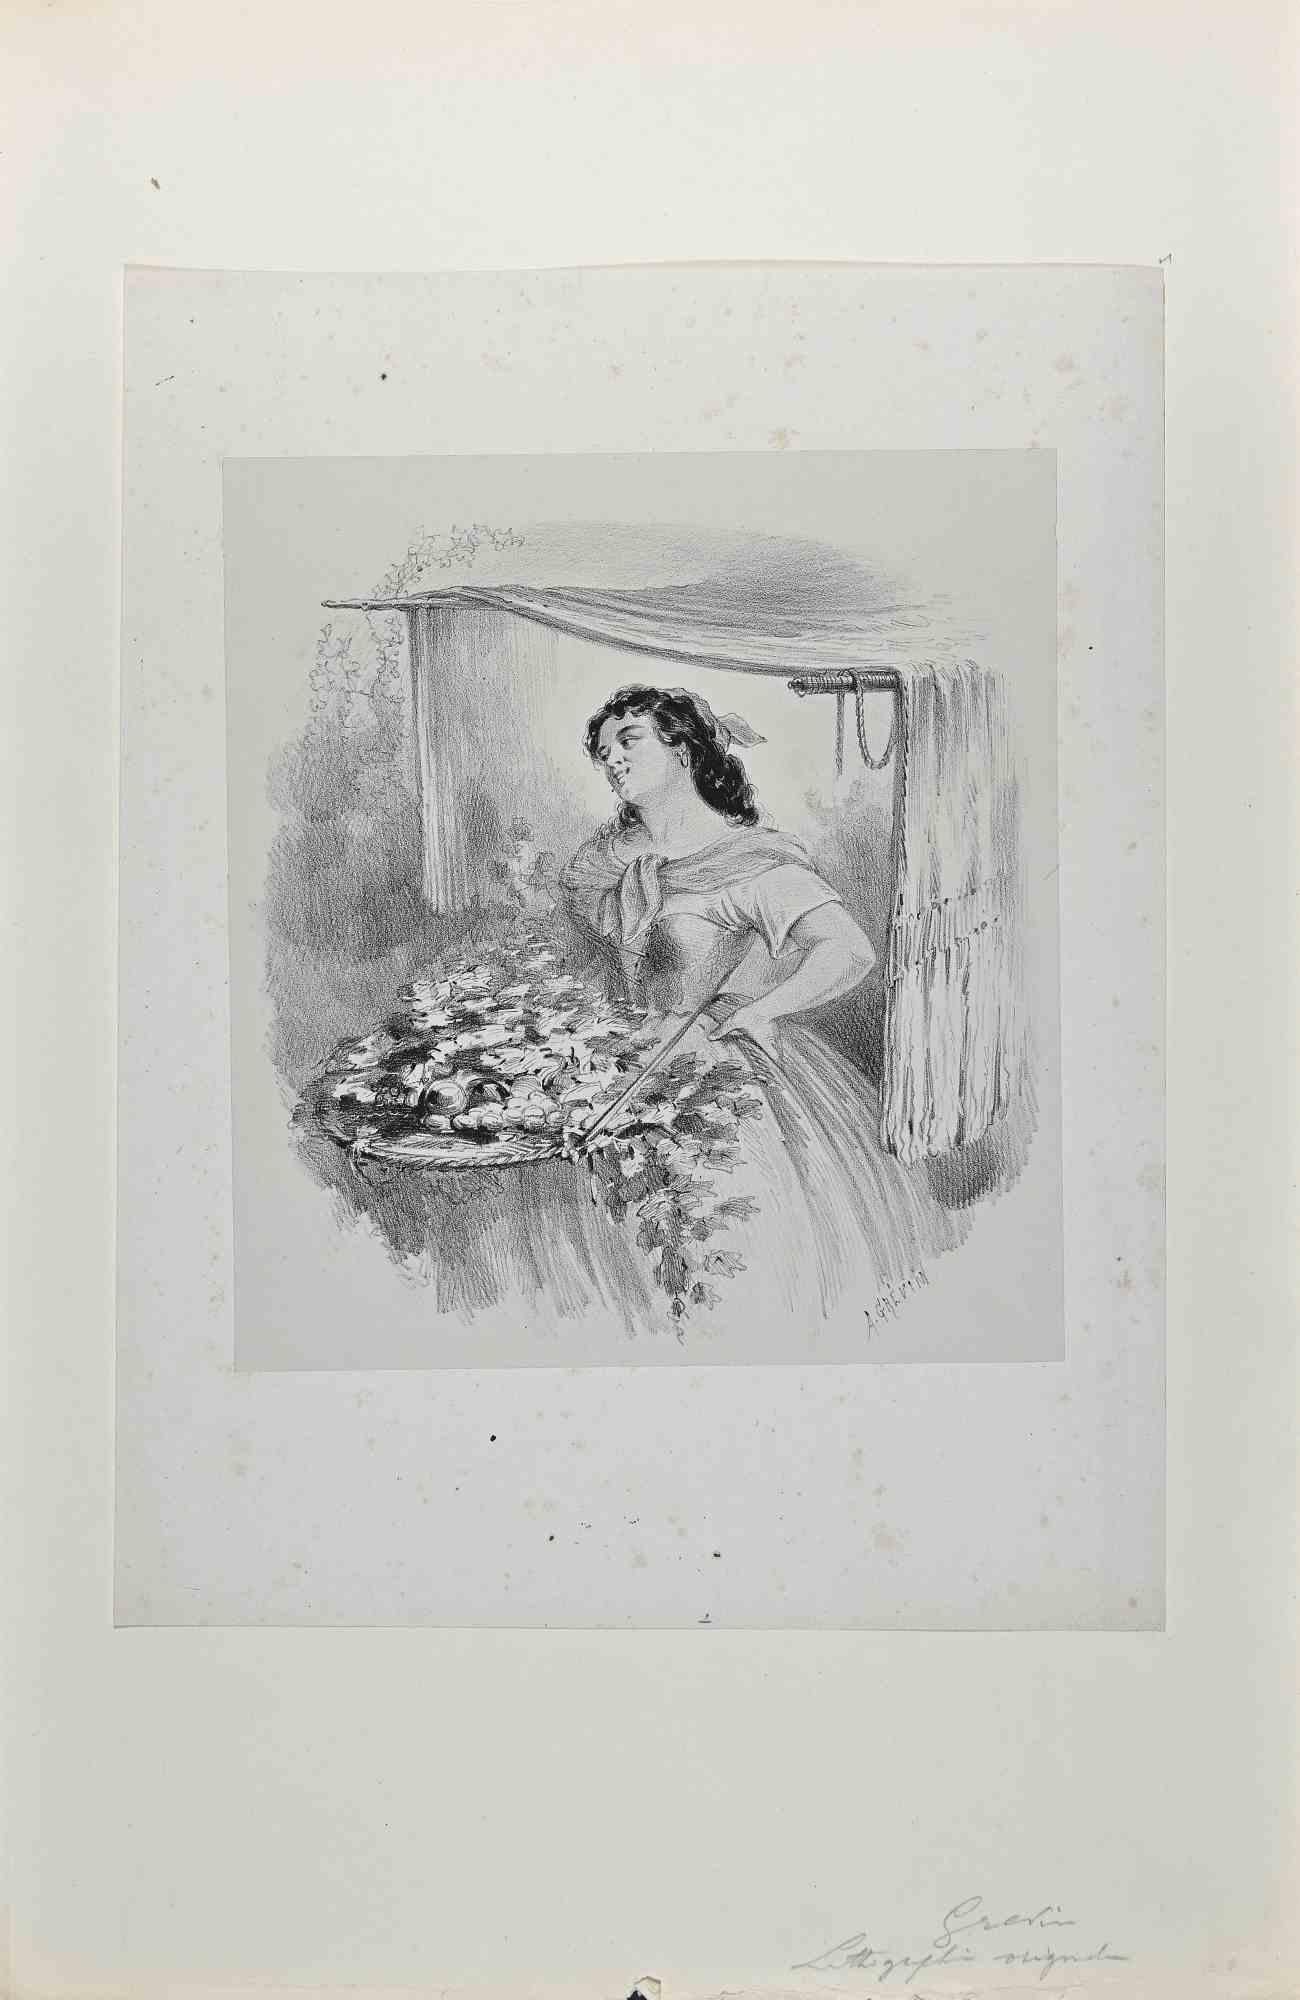 Alfred Grevin Figurative Print - The Lady With Flowers  - Original Lithograph by A. Grevin - Late 19 Century